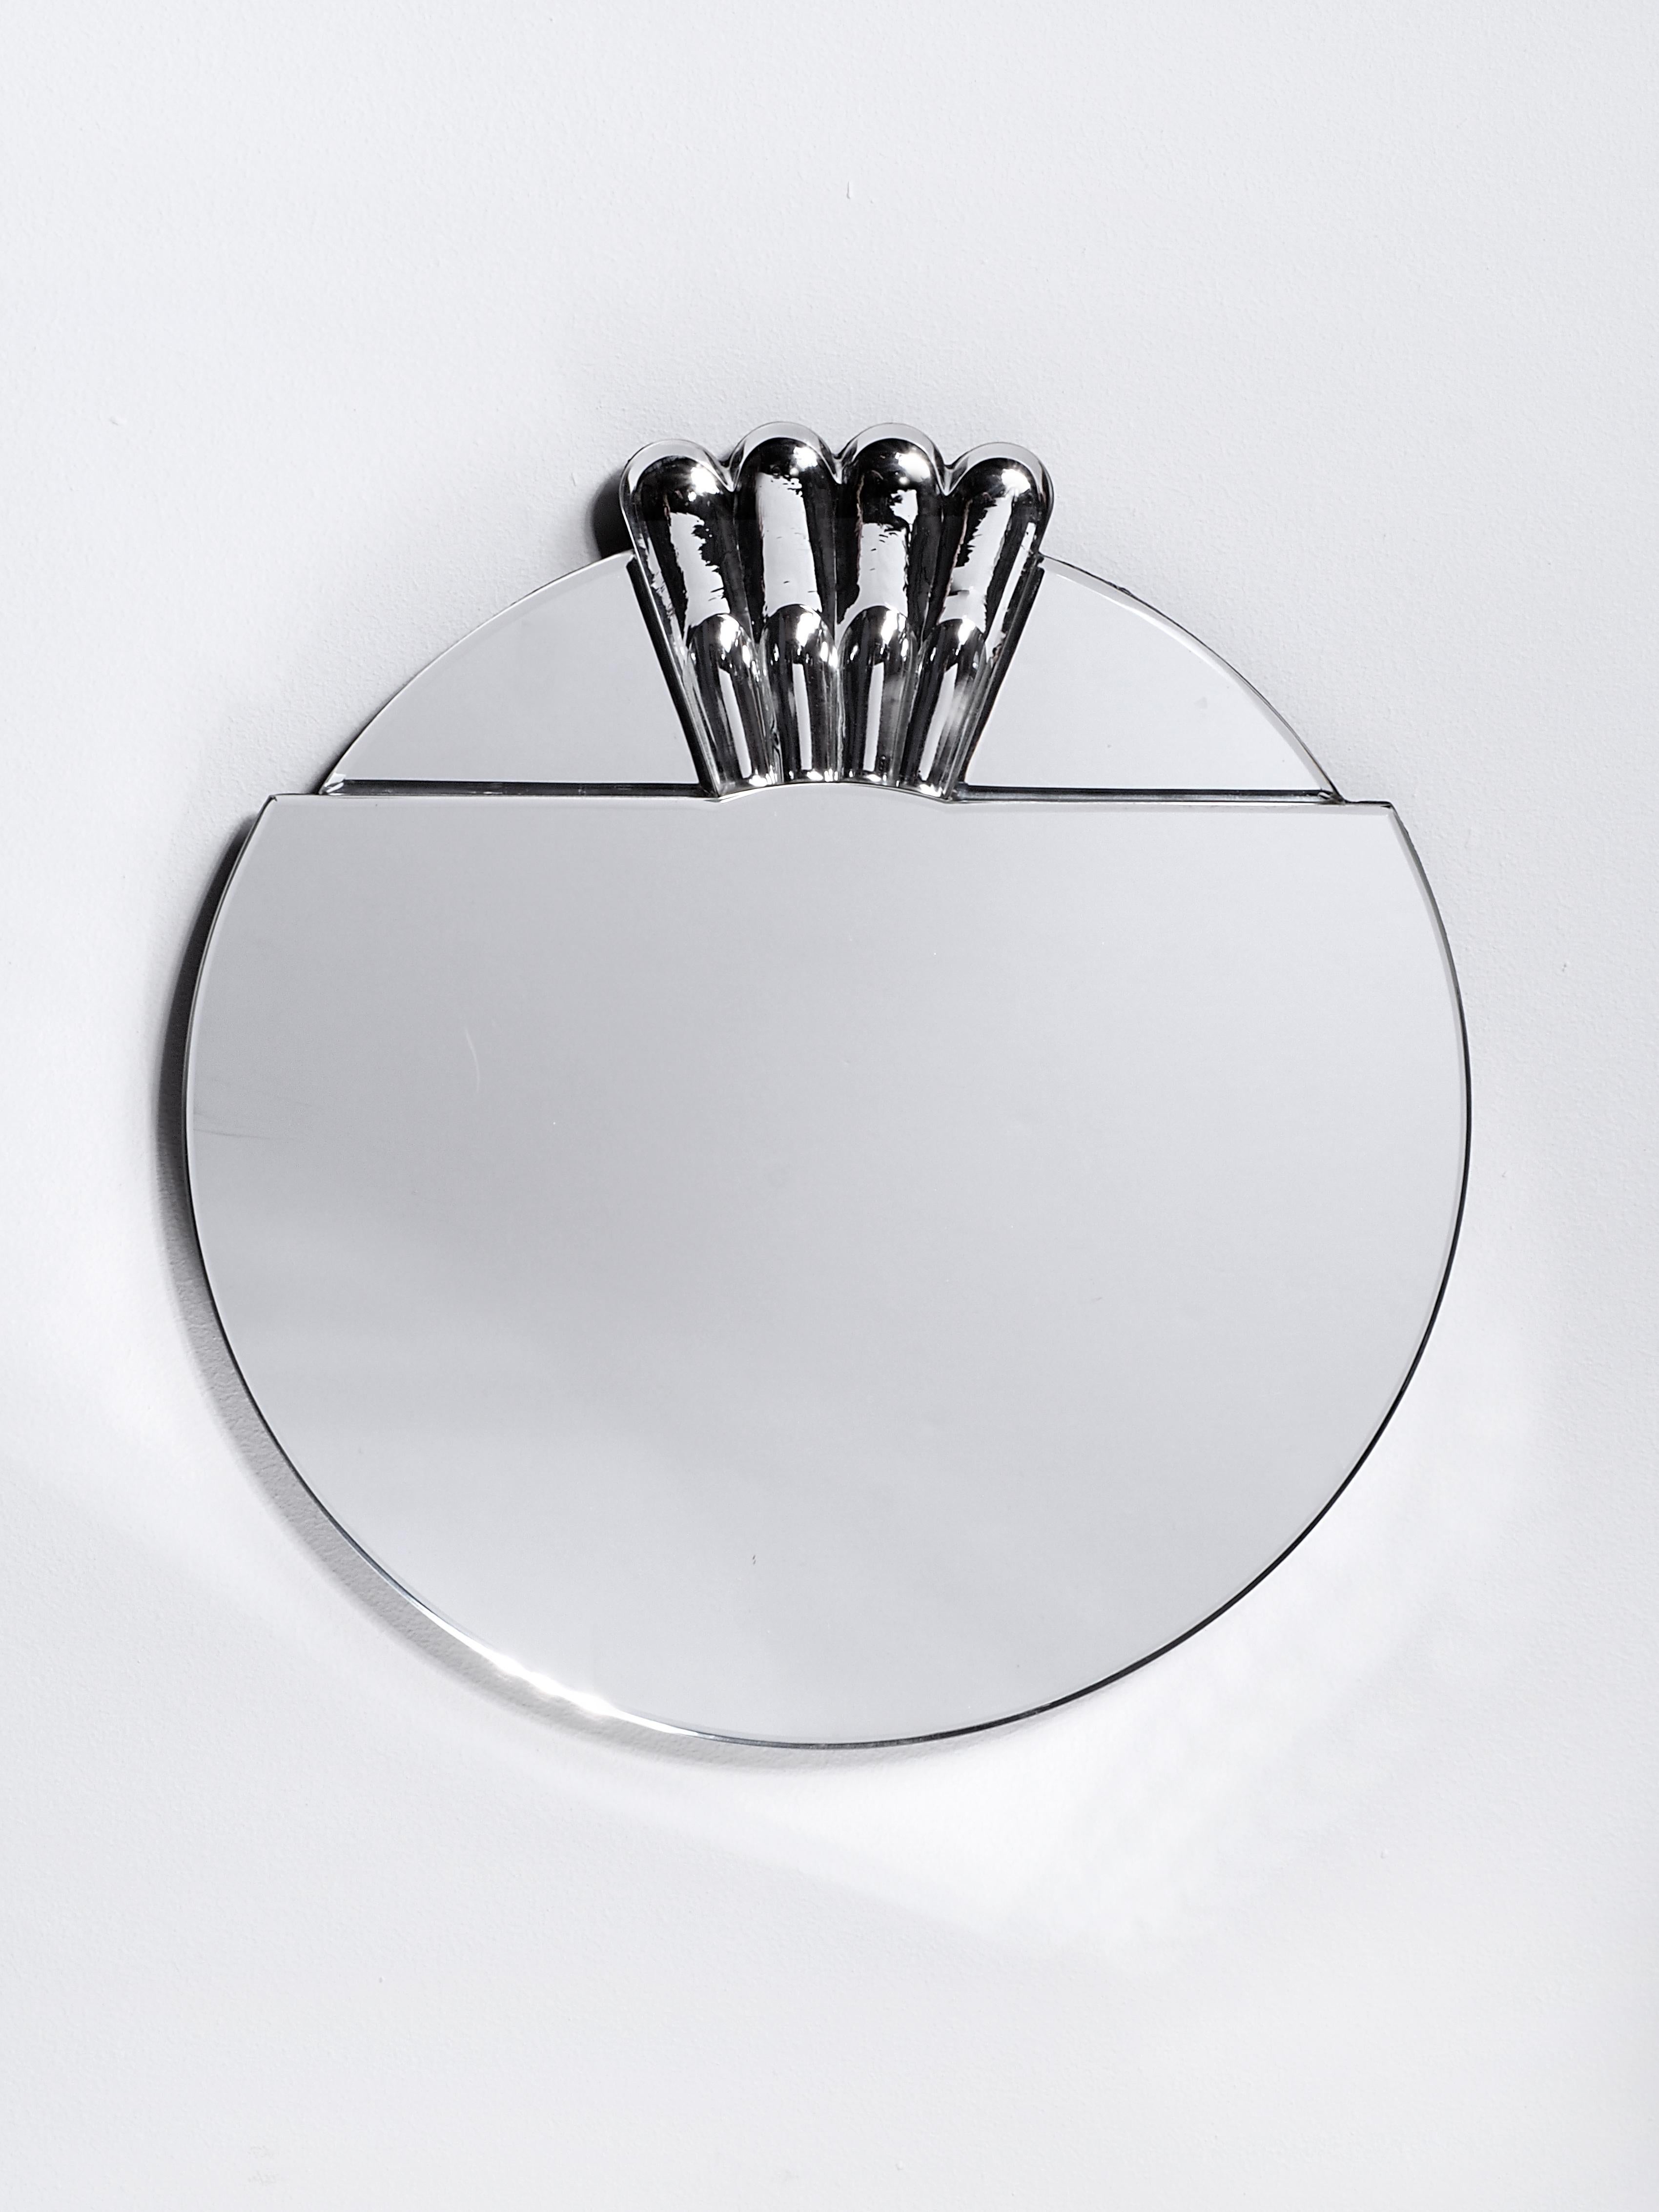 Scena elemento tre murano mirror by Nikolai Kotlarczyk
Dimensions: D 3 x W 30 x H 30 cm 
Materials: Silvered carved glass, dark gray wood back.
Also available in other sizes and dimensions. 


Elemento is a series of solid glass mirrors full